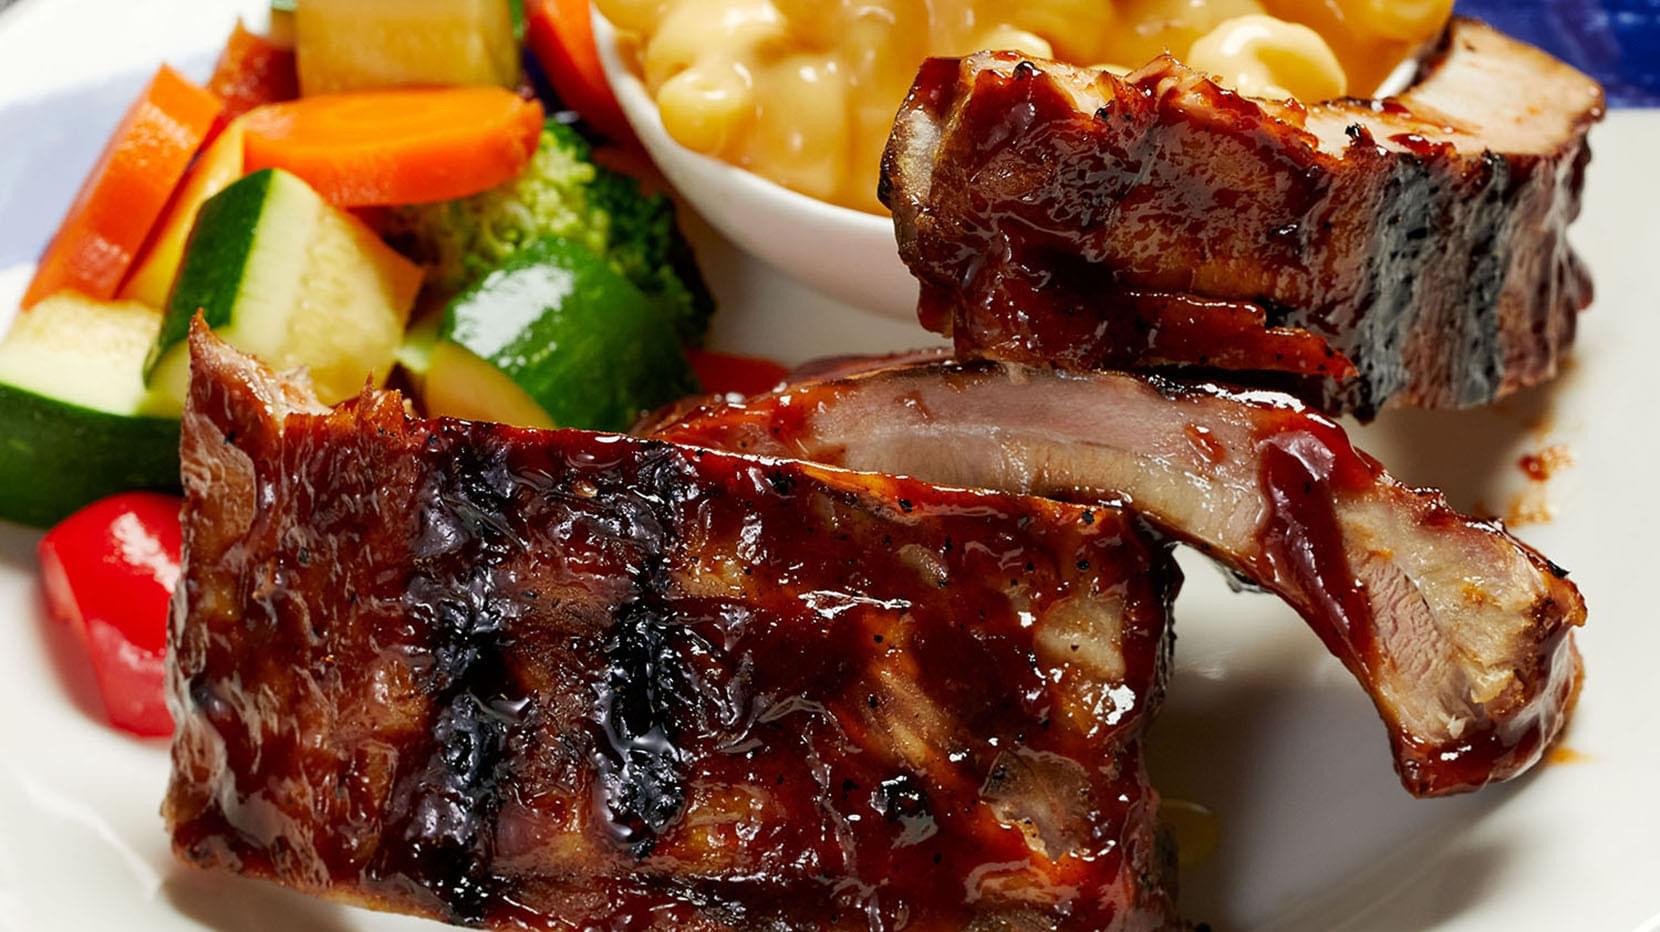 A plate featuring kid-sized portions of glazed ribs, fresh vegetables, and macaroni and cheese.